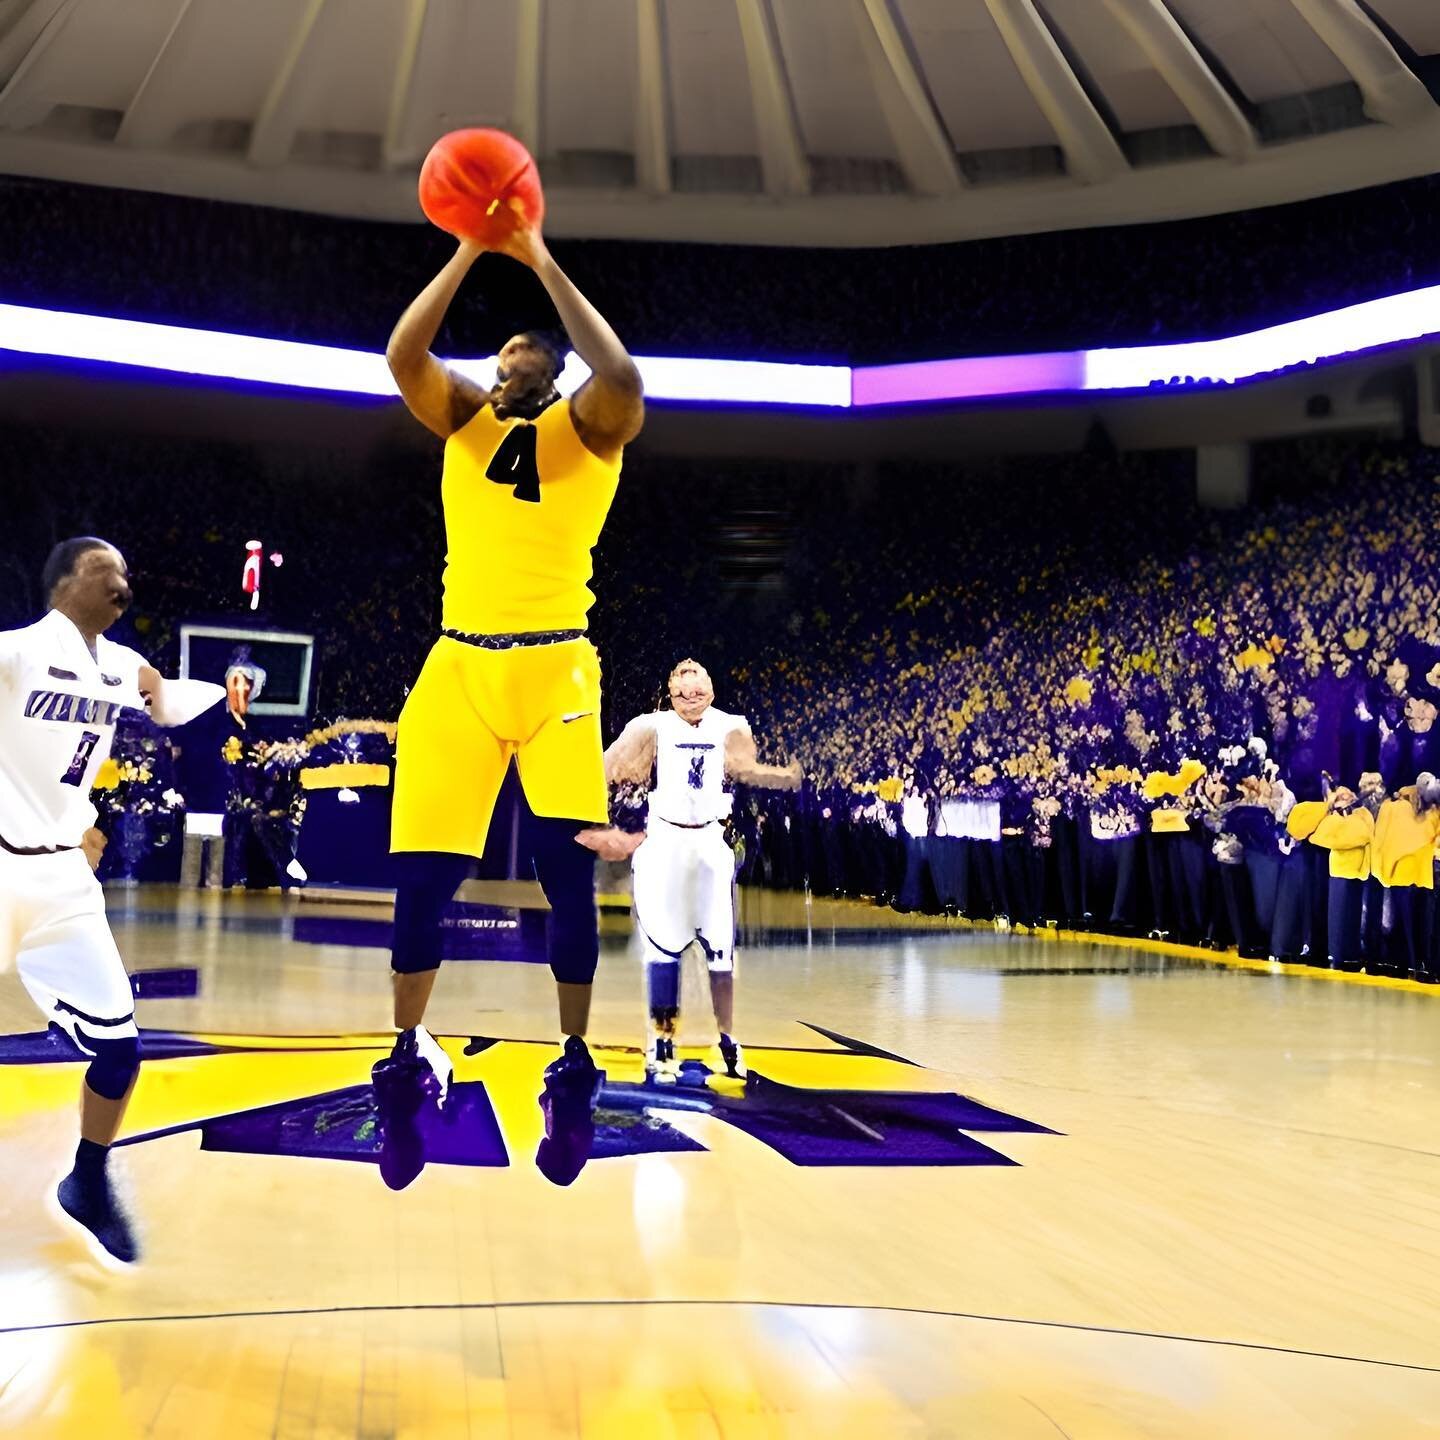 In case you&rsquo;re worried about the Skynet scenario, here&rsquo;s AI art of &ldquo;Michigan Wolverines crushing the Northwestern Wildcats in basketball&rdquo;

Big win tonight for the Wolverines, who are in control of their own destiny.  If they w